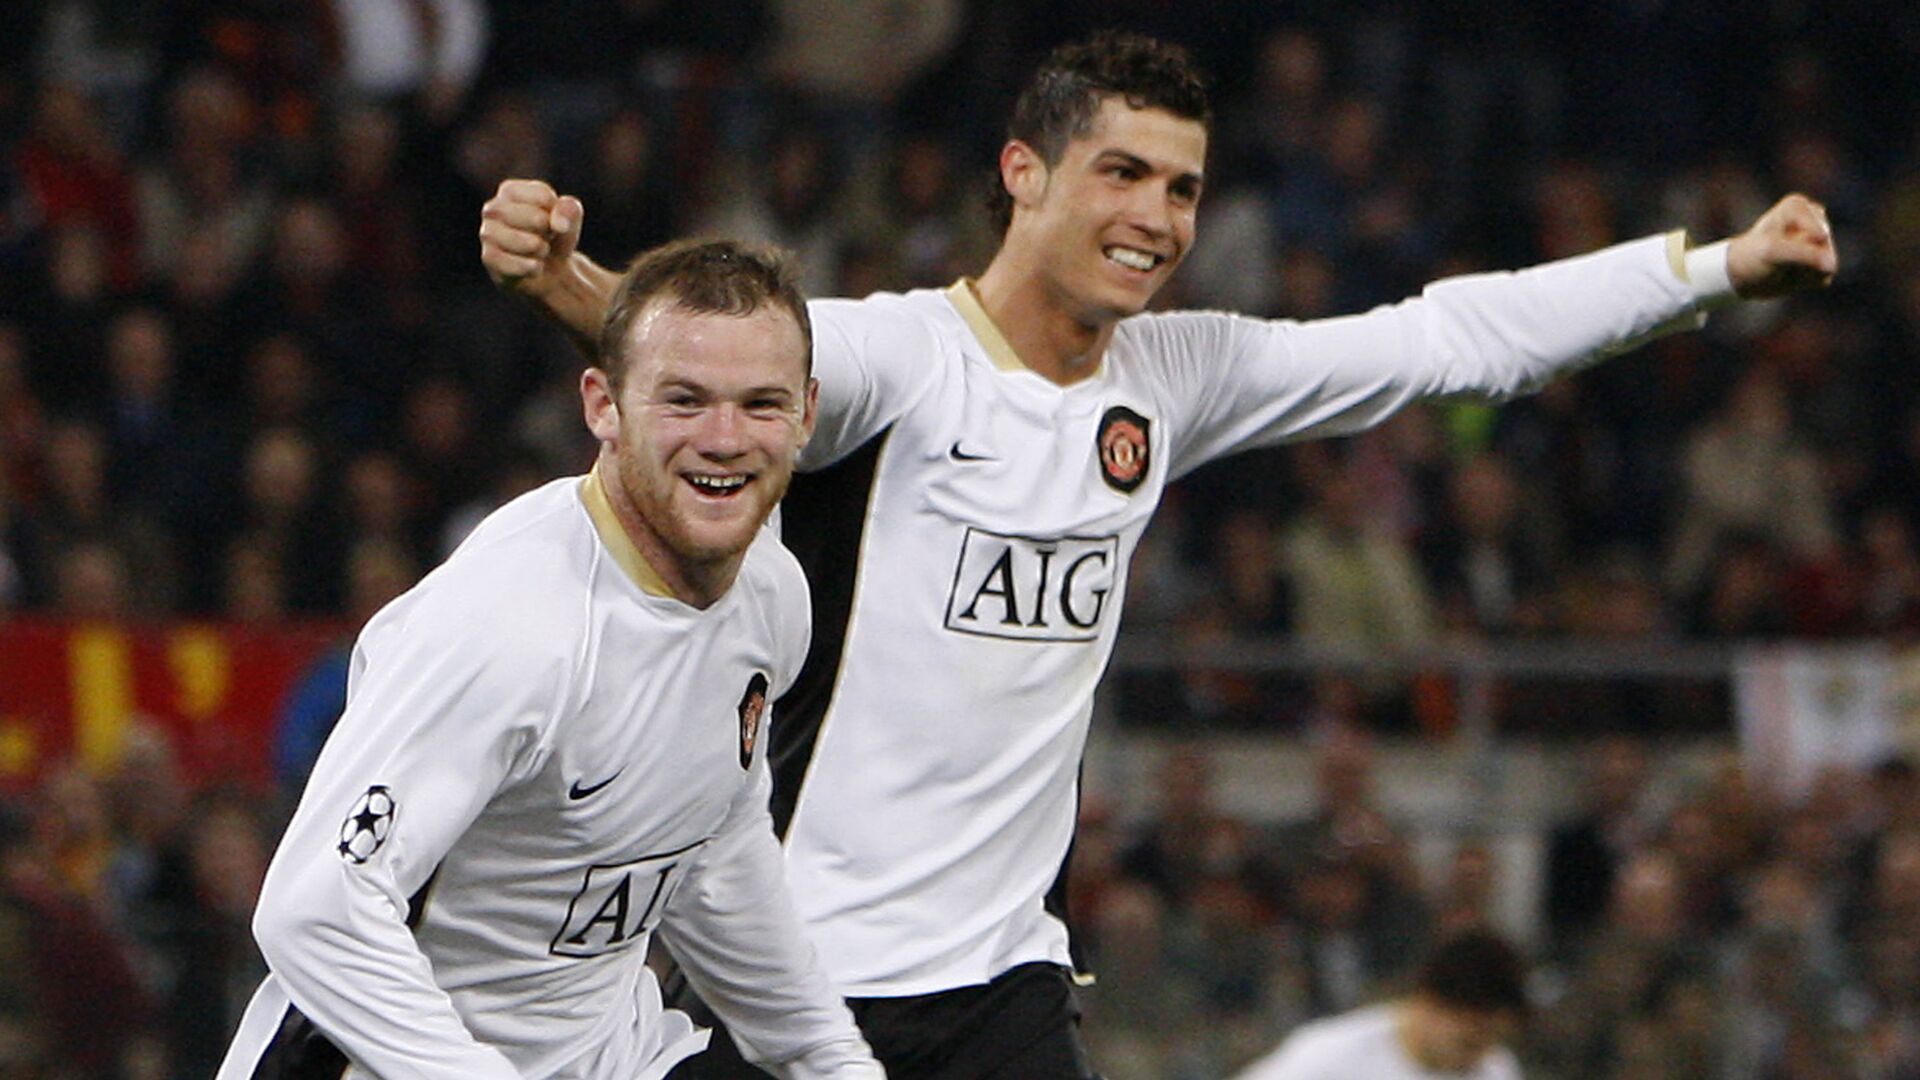 Manchester United's Wayne Rooney, left, celebrates after scoring  against AS Roma with teammate Cristiano Ronaldo, during their Champion's League quarterfinal, first-leg soccer match at the Rome Olympic stadium, Rome, Italy, Tuesday April 1, 2008. Manchester United won 2-0 with the first goal scored by Ronaldo and the second one by Rooney. - اسپوتنیک افغانستان  , 1920, 07.08.2022